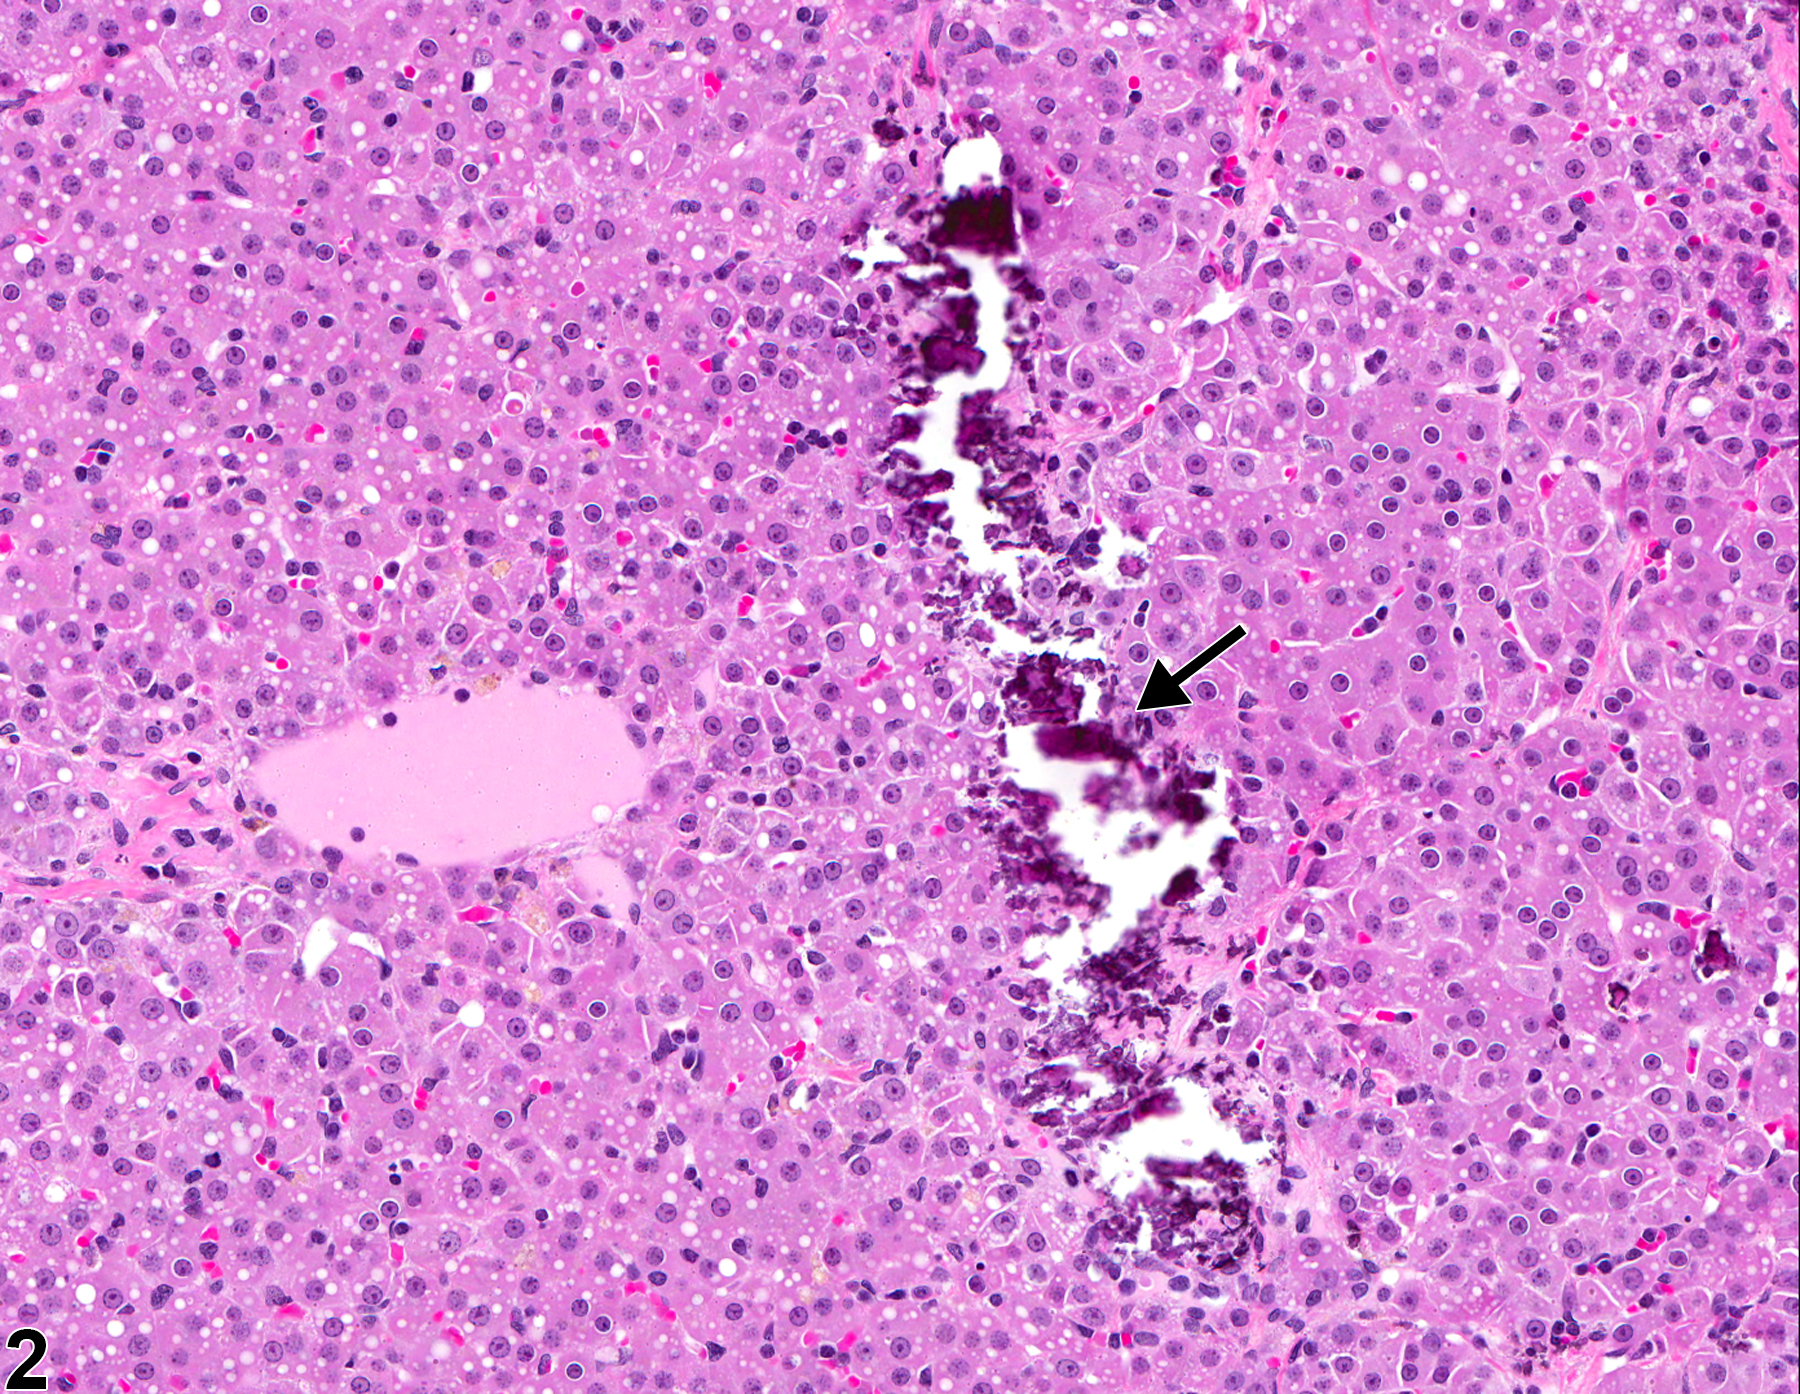 Image of mineralization in the adrenal gland from a male F344/N rat in a chronic study